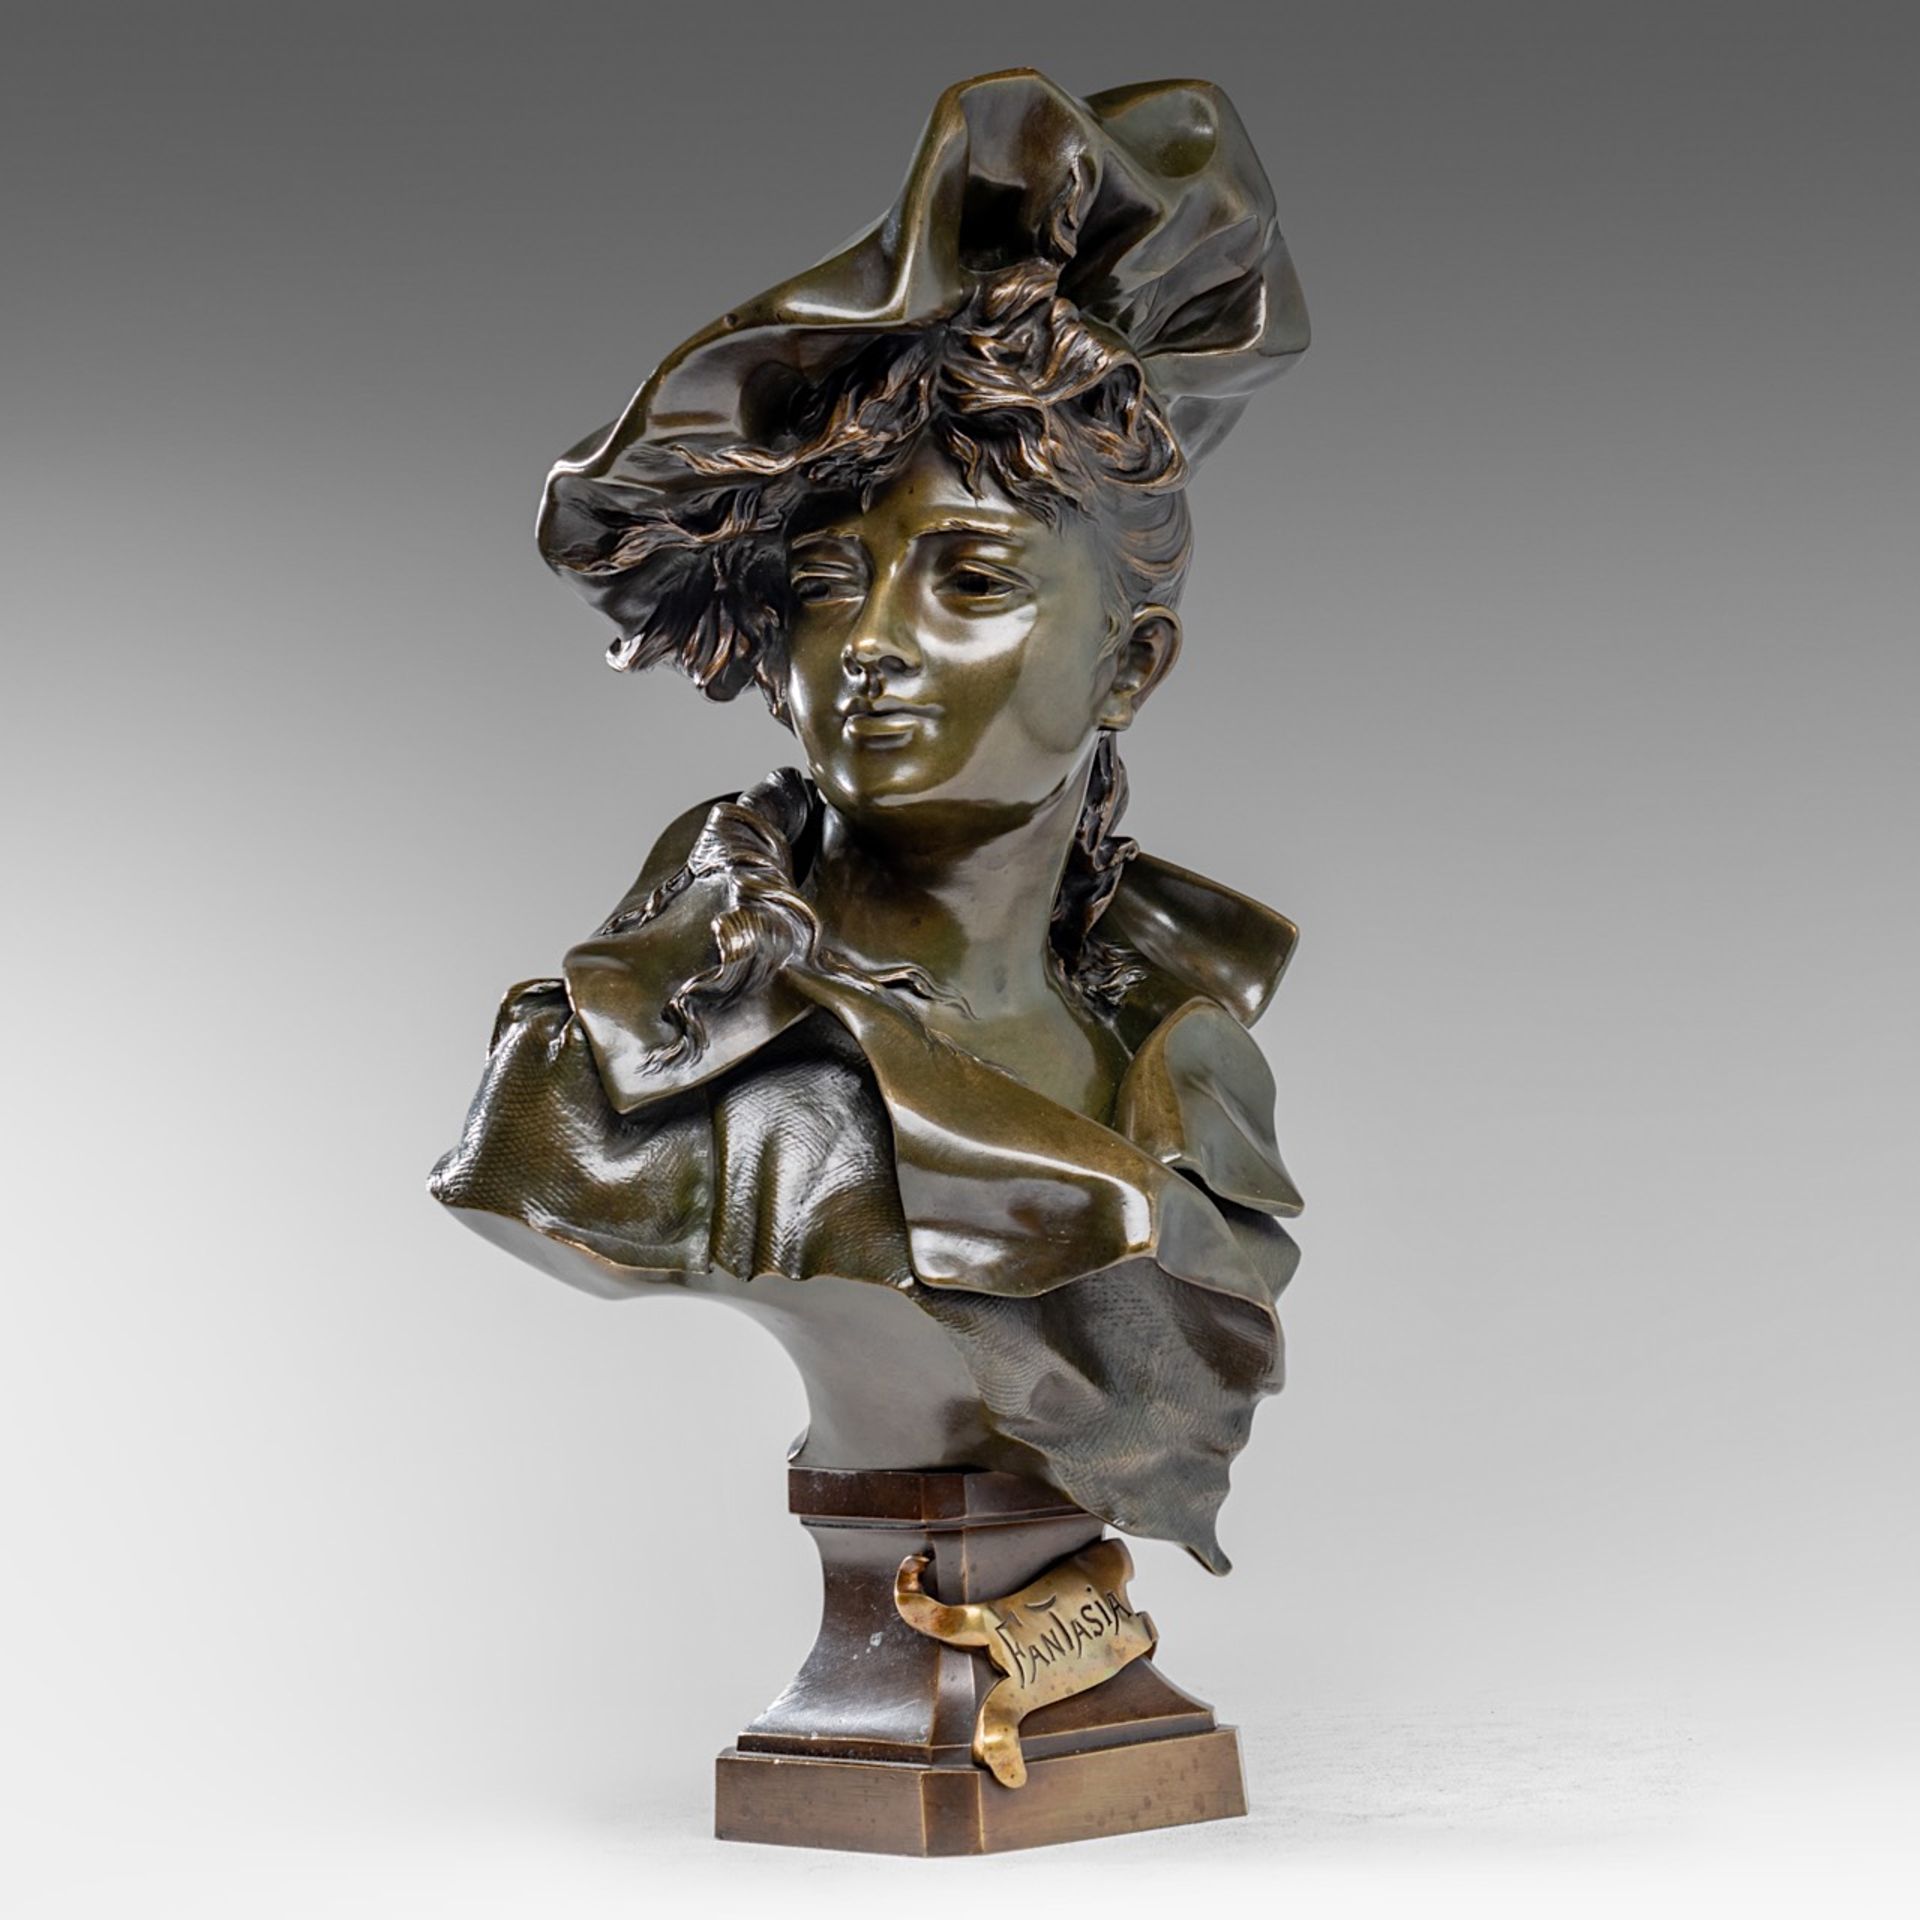 Anton Nelson (1849-1910), 'Fantasia', green patinated bronze bust, H 48 cm - Image 2 of 11